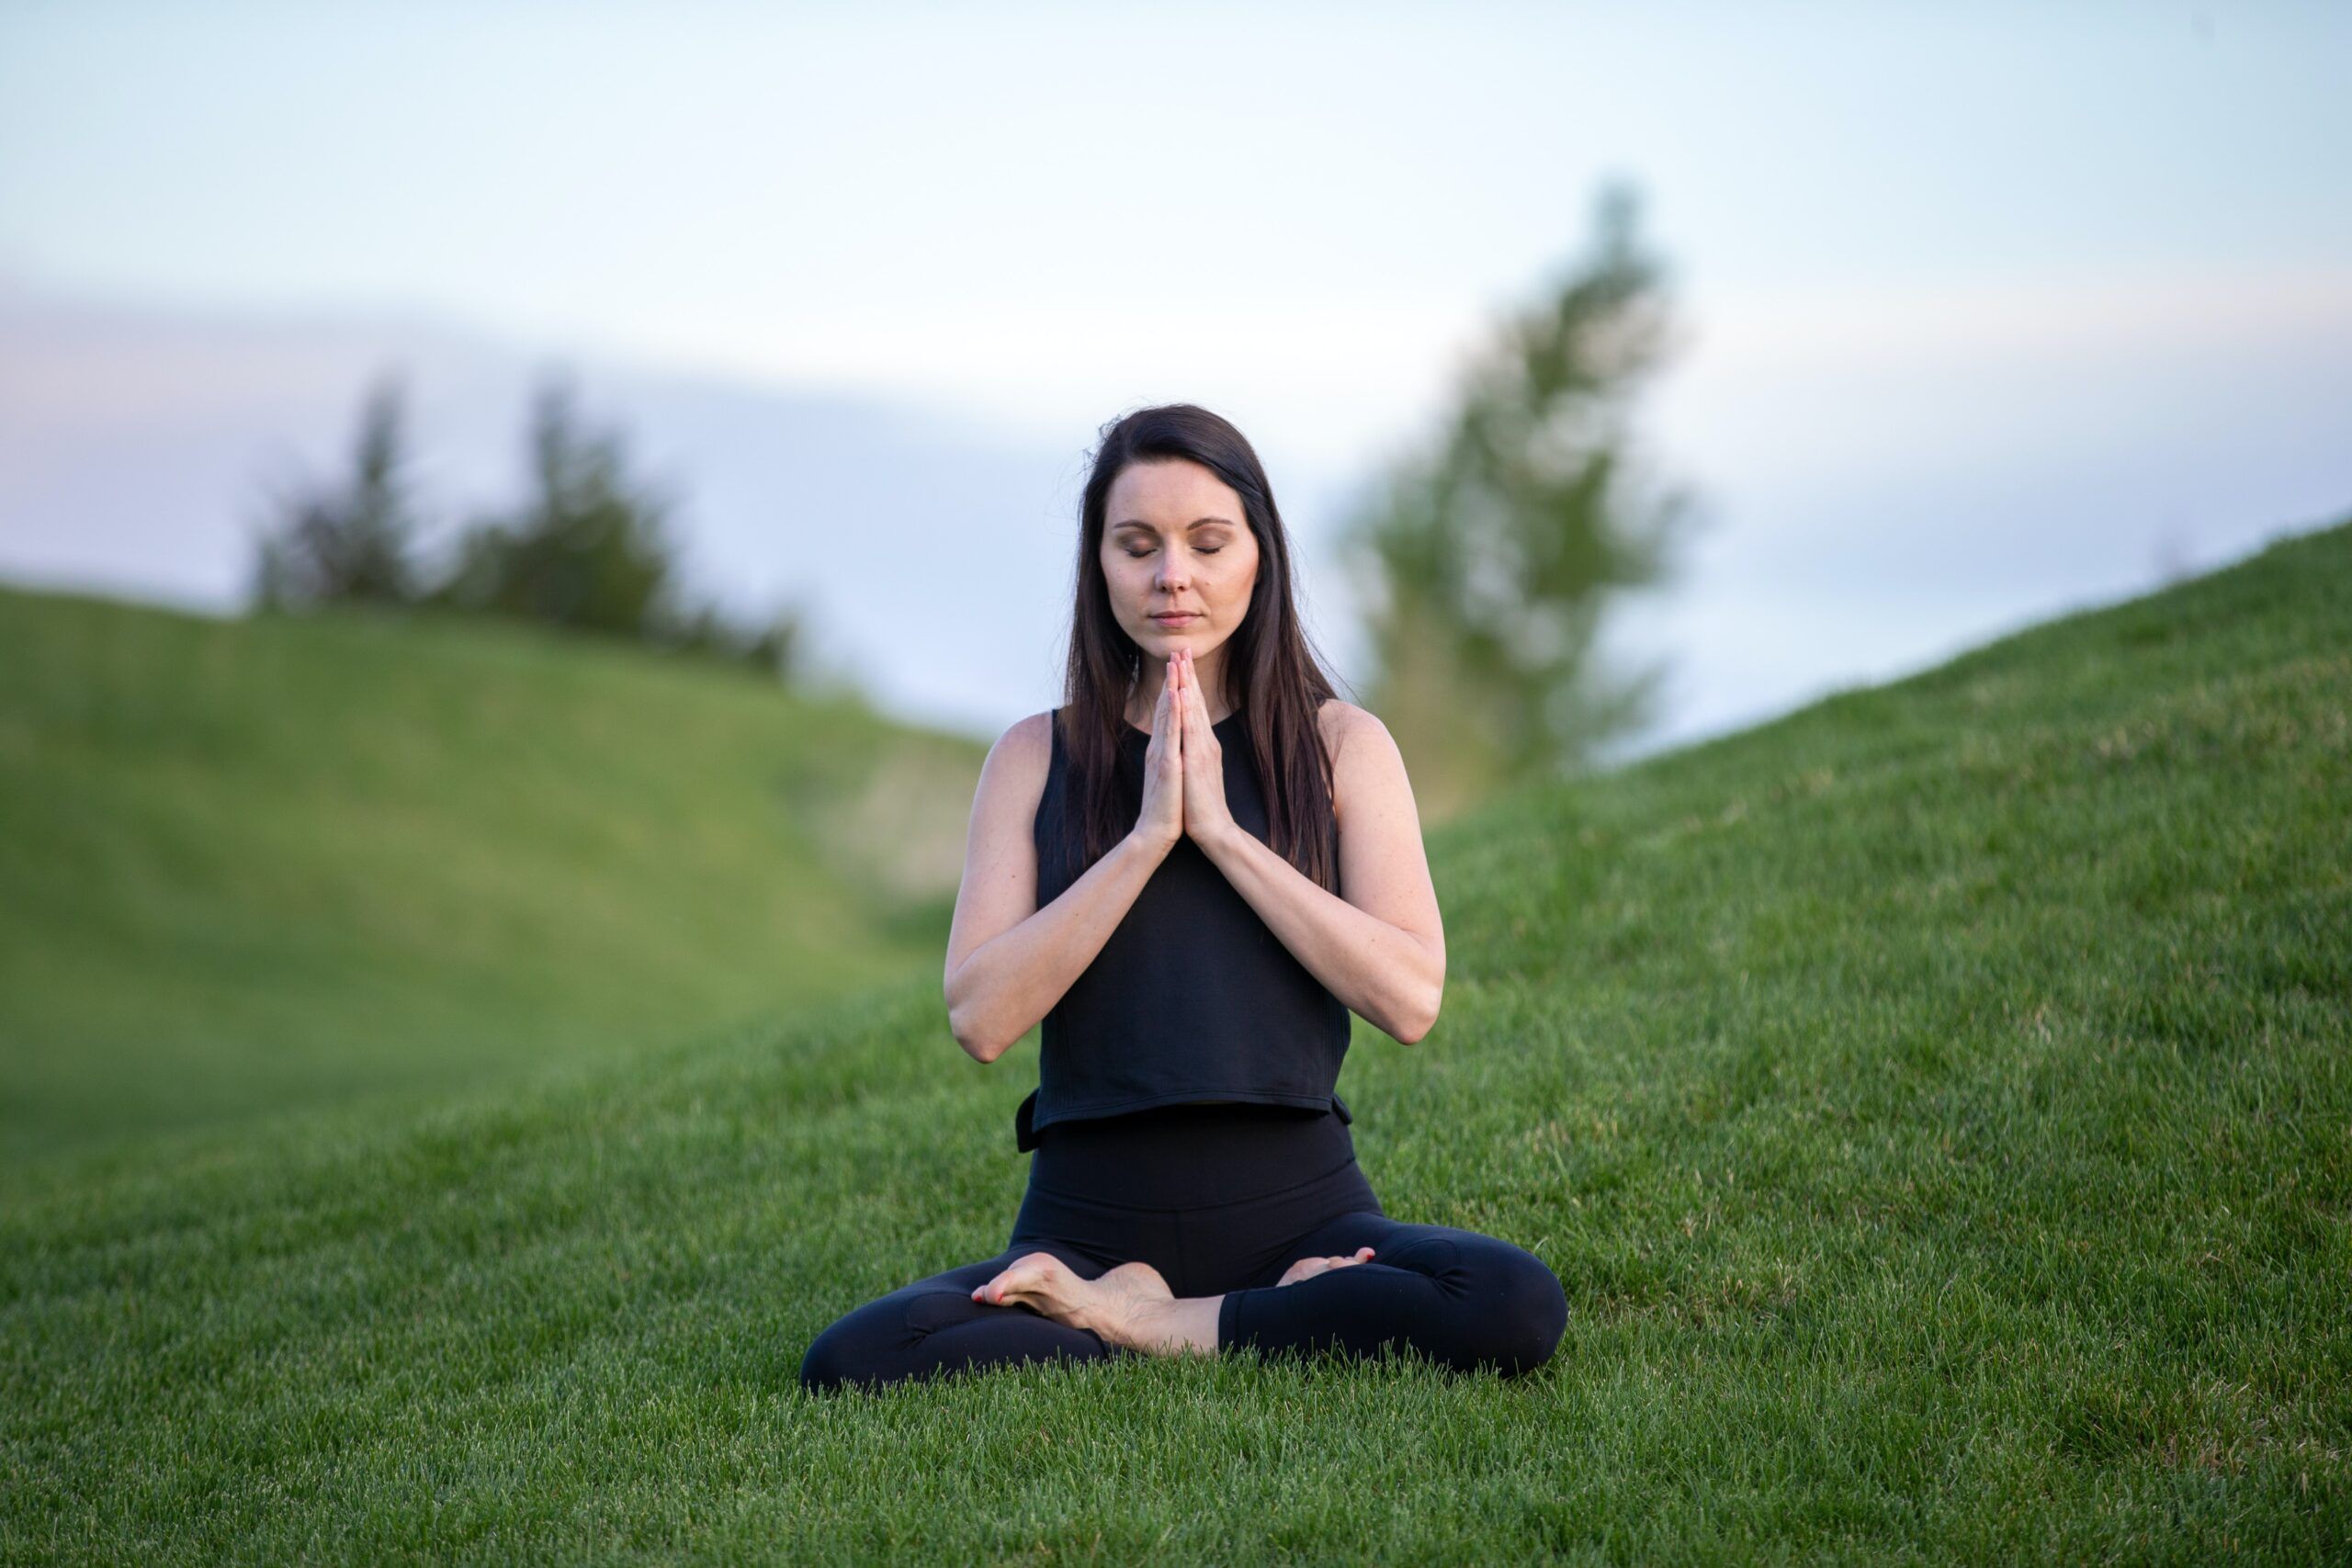 How to control your thoughts during meditation 1